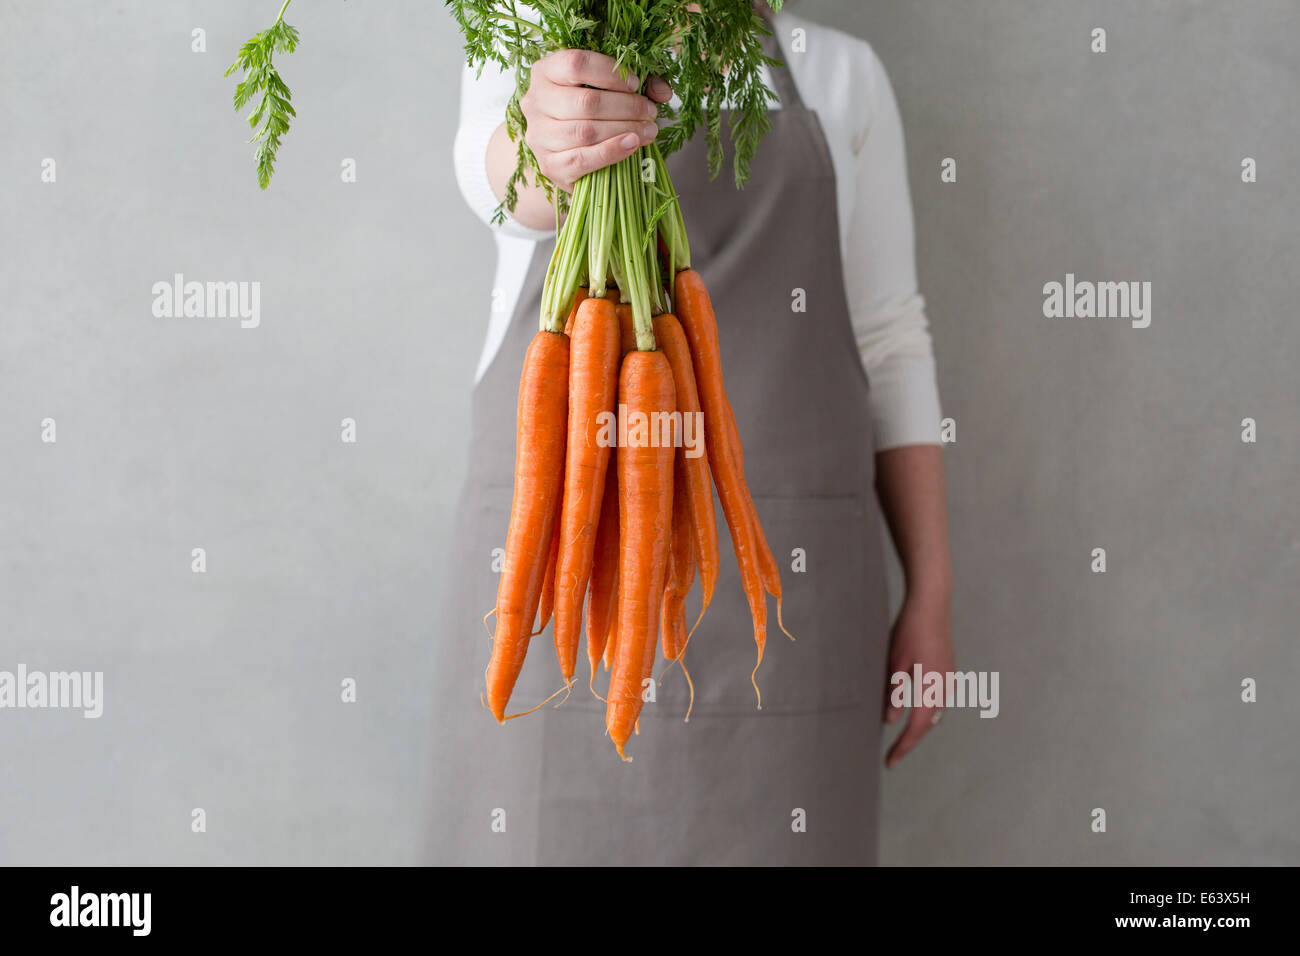 a woman wearing an apron holds out a fresh bunch of organic carrots Stock Photo